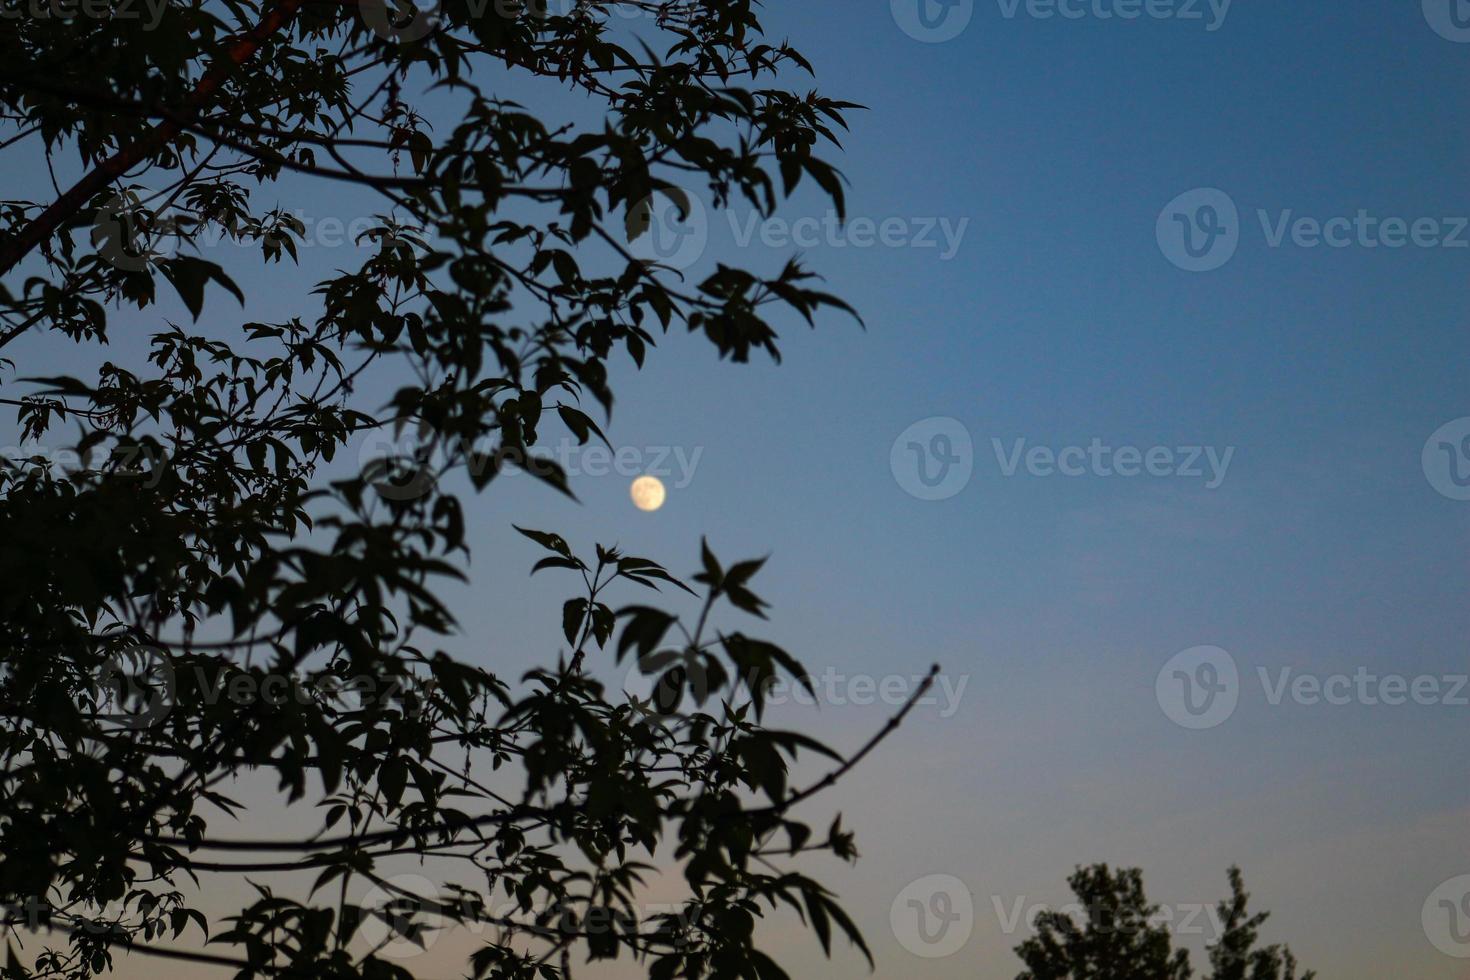 Small blurry moon almost full circle in blue sky behind tree branches silhouette with leaves photo